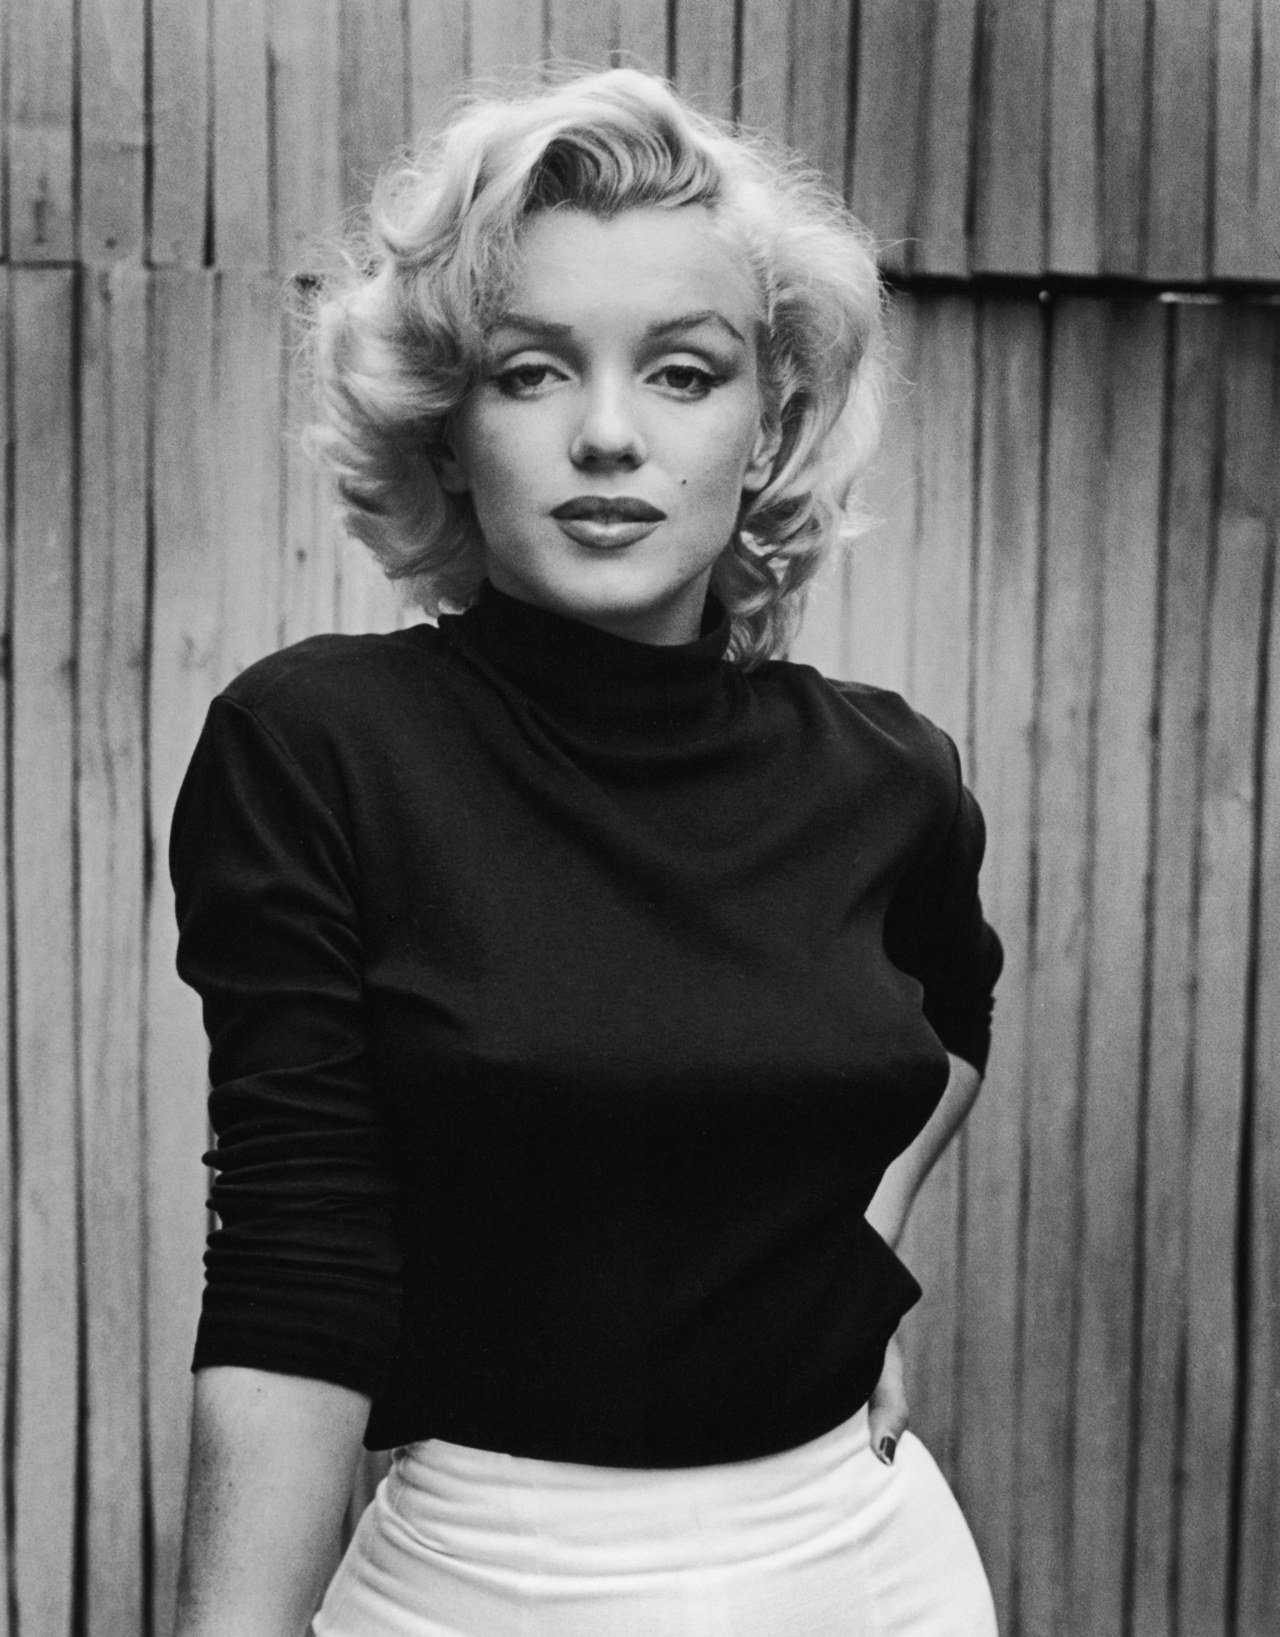 Portræt of American actress Marilyn Monroe (1926 - 1962) as she poses on the patio outside of her home, Hollywood, California, May 1953. (Photo by Alfred Eisenstaedt/The LIFE Picture Collection/Getty Images)